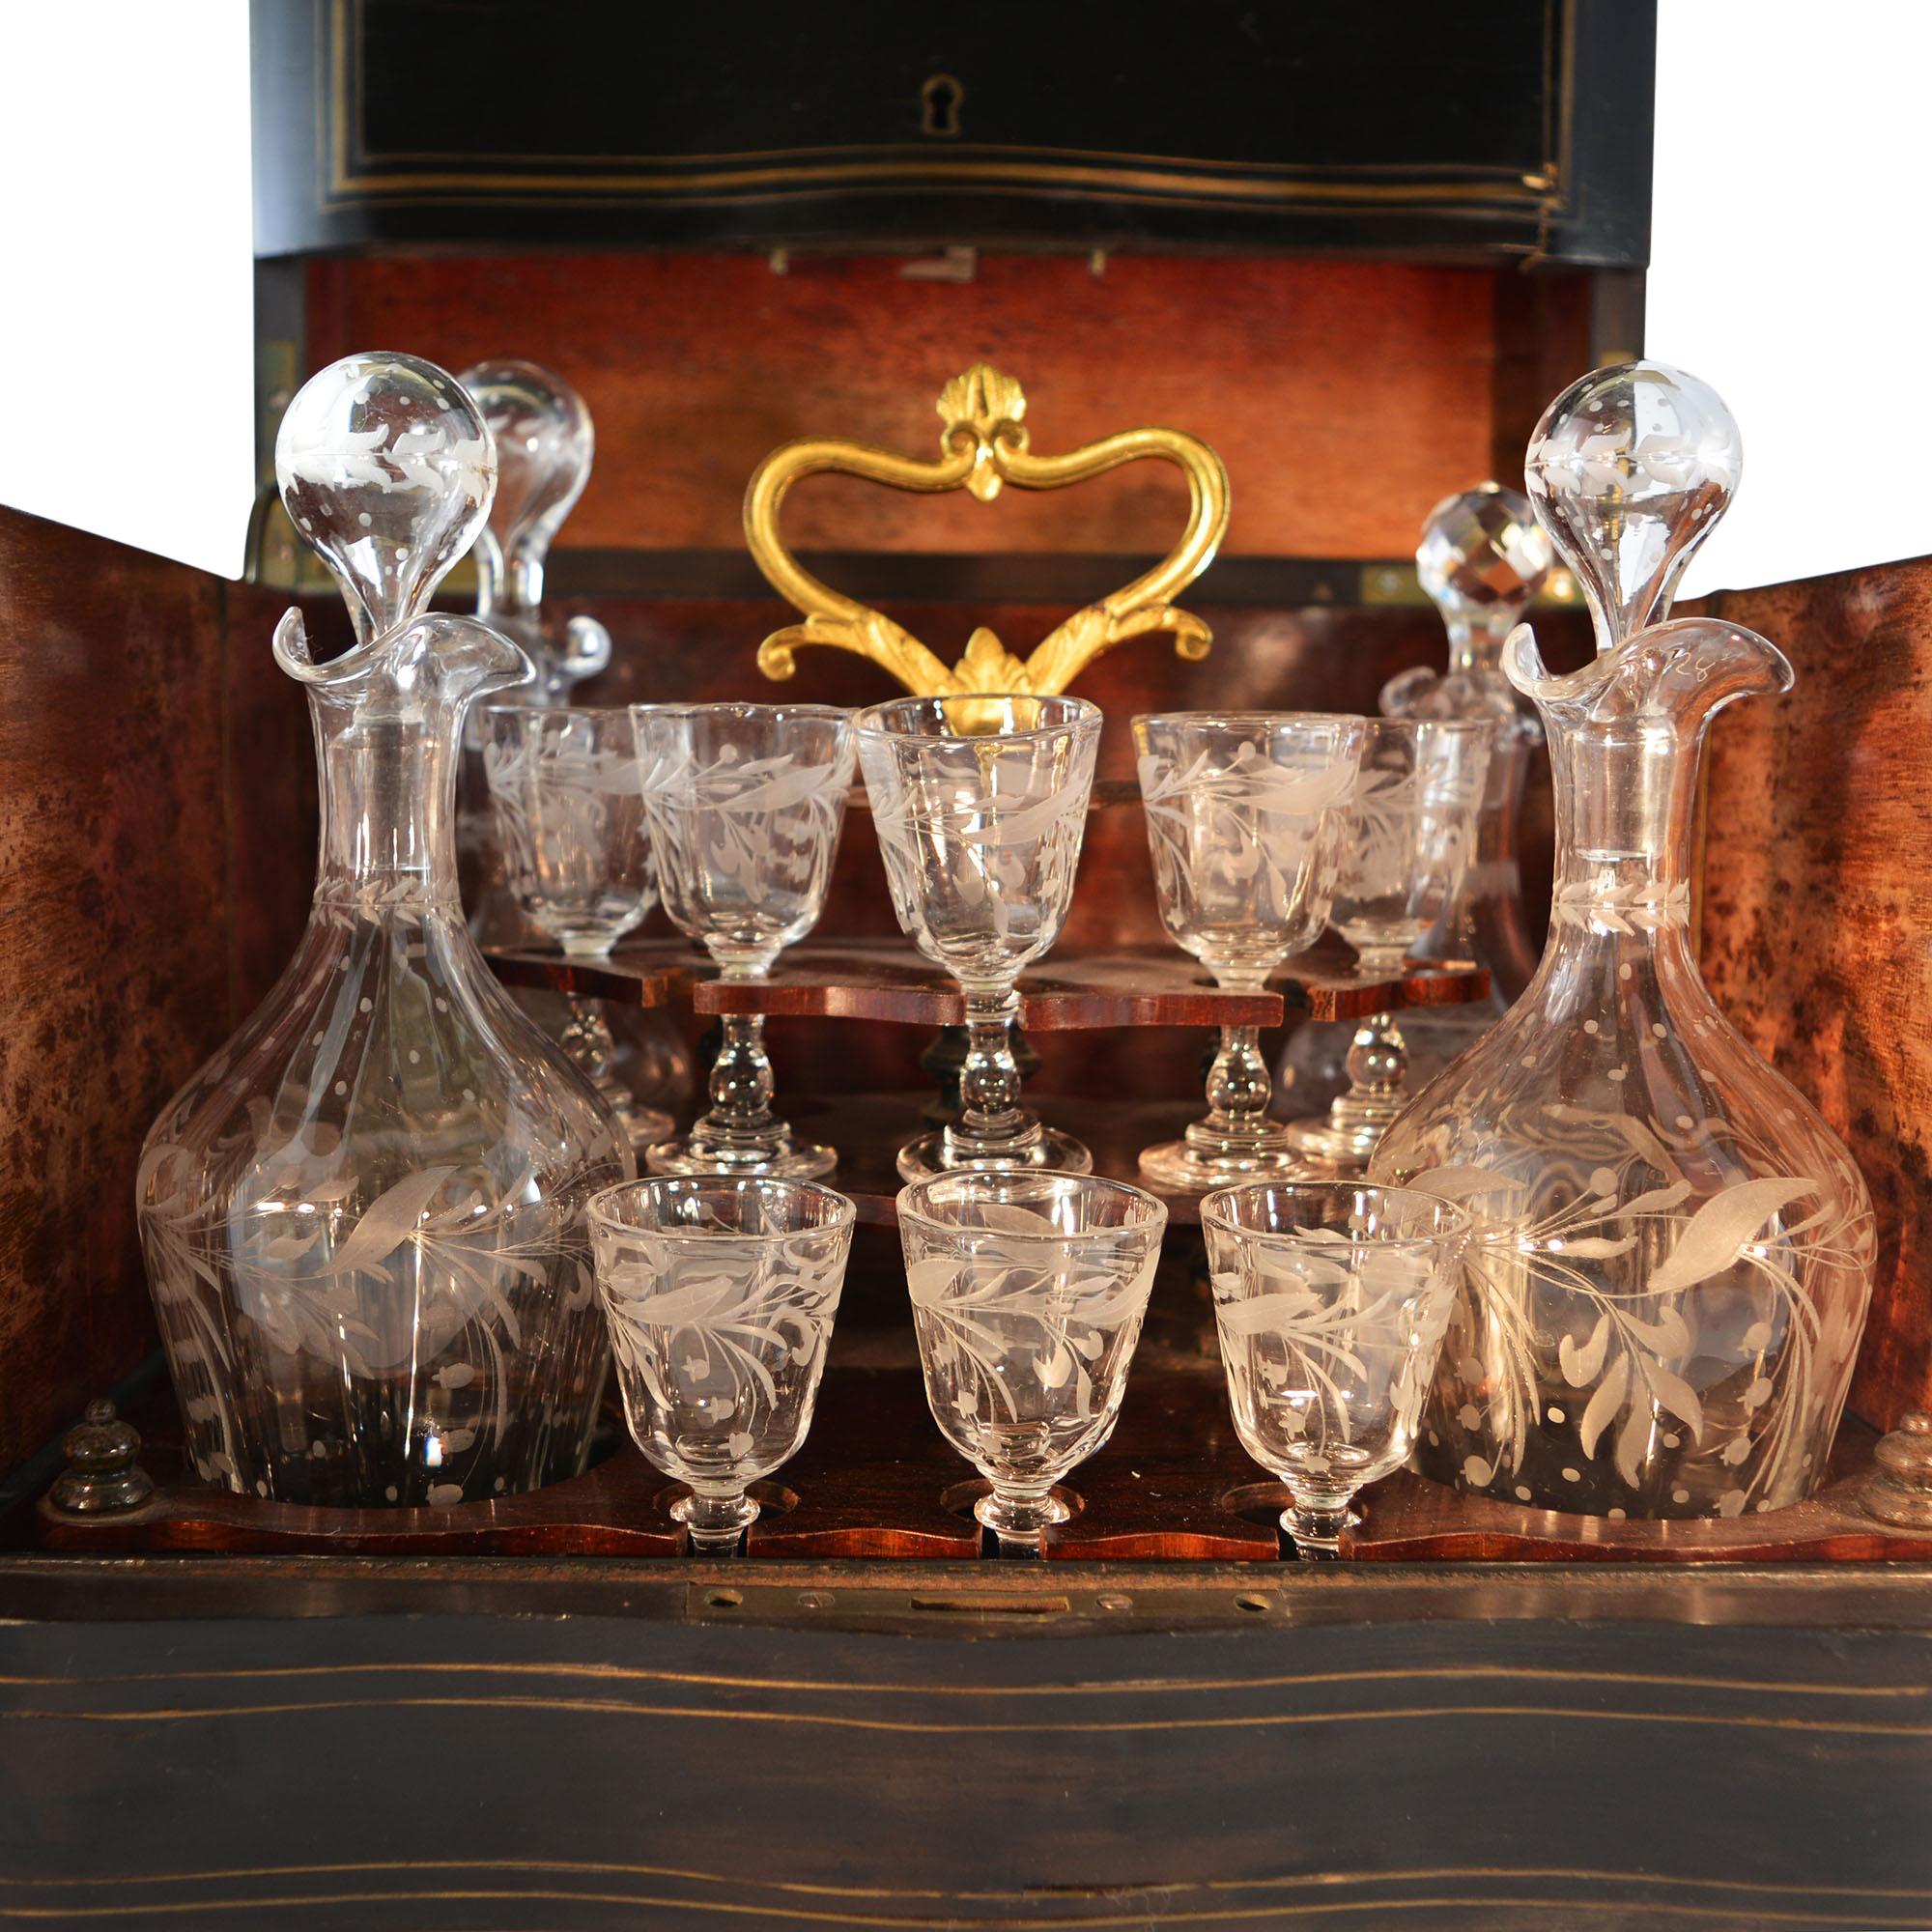 Liquor cave in brass inlaid ebony wood with rosewood interior. Front and top of the box sides are decorated with brass inlay. The tantalus set contains a removable wooden inset with brass lift handle. Includes hand cut and engraved crystal decanters